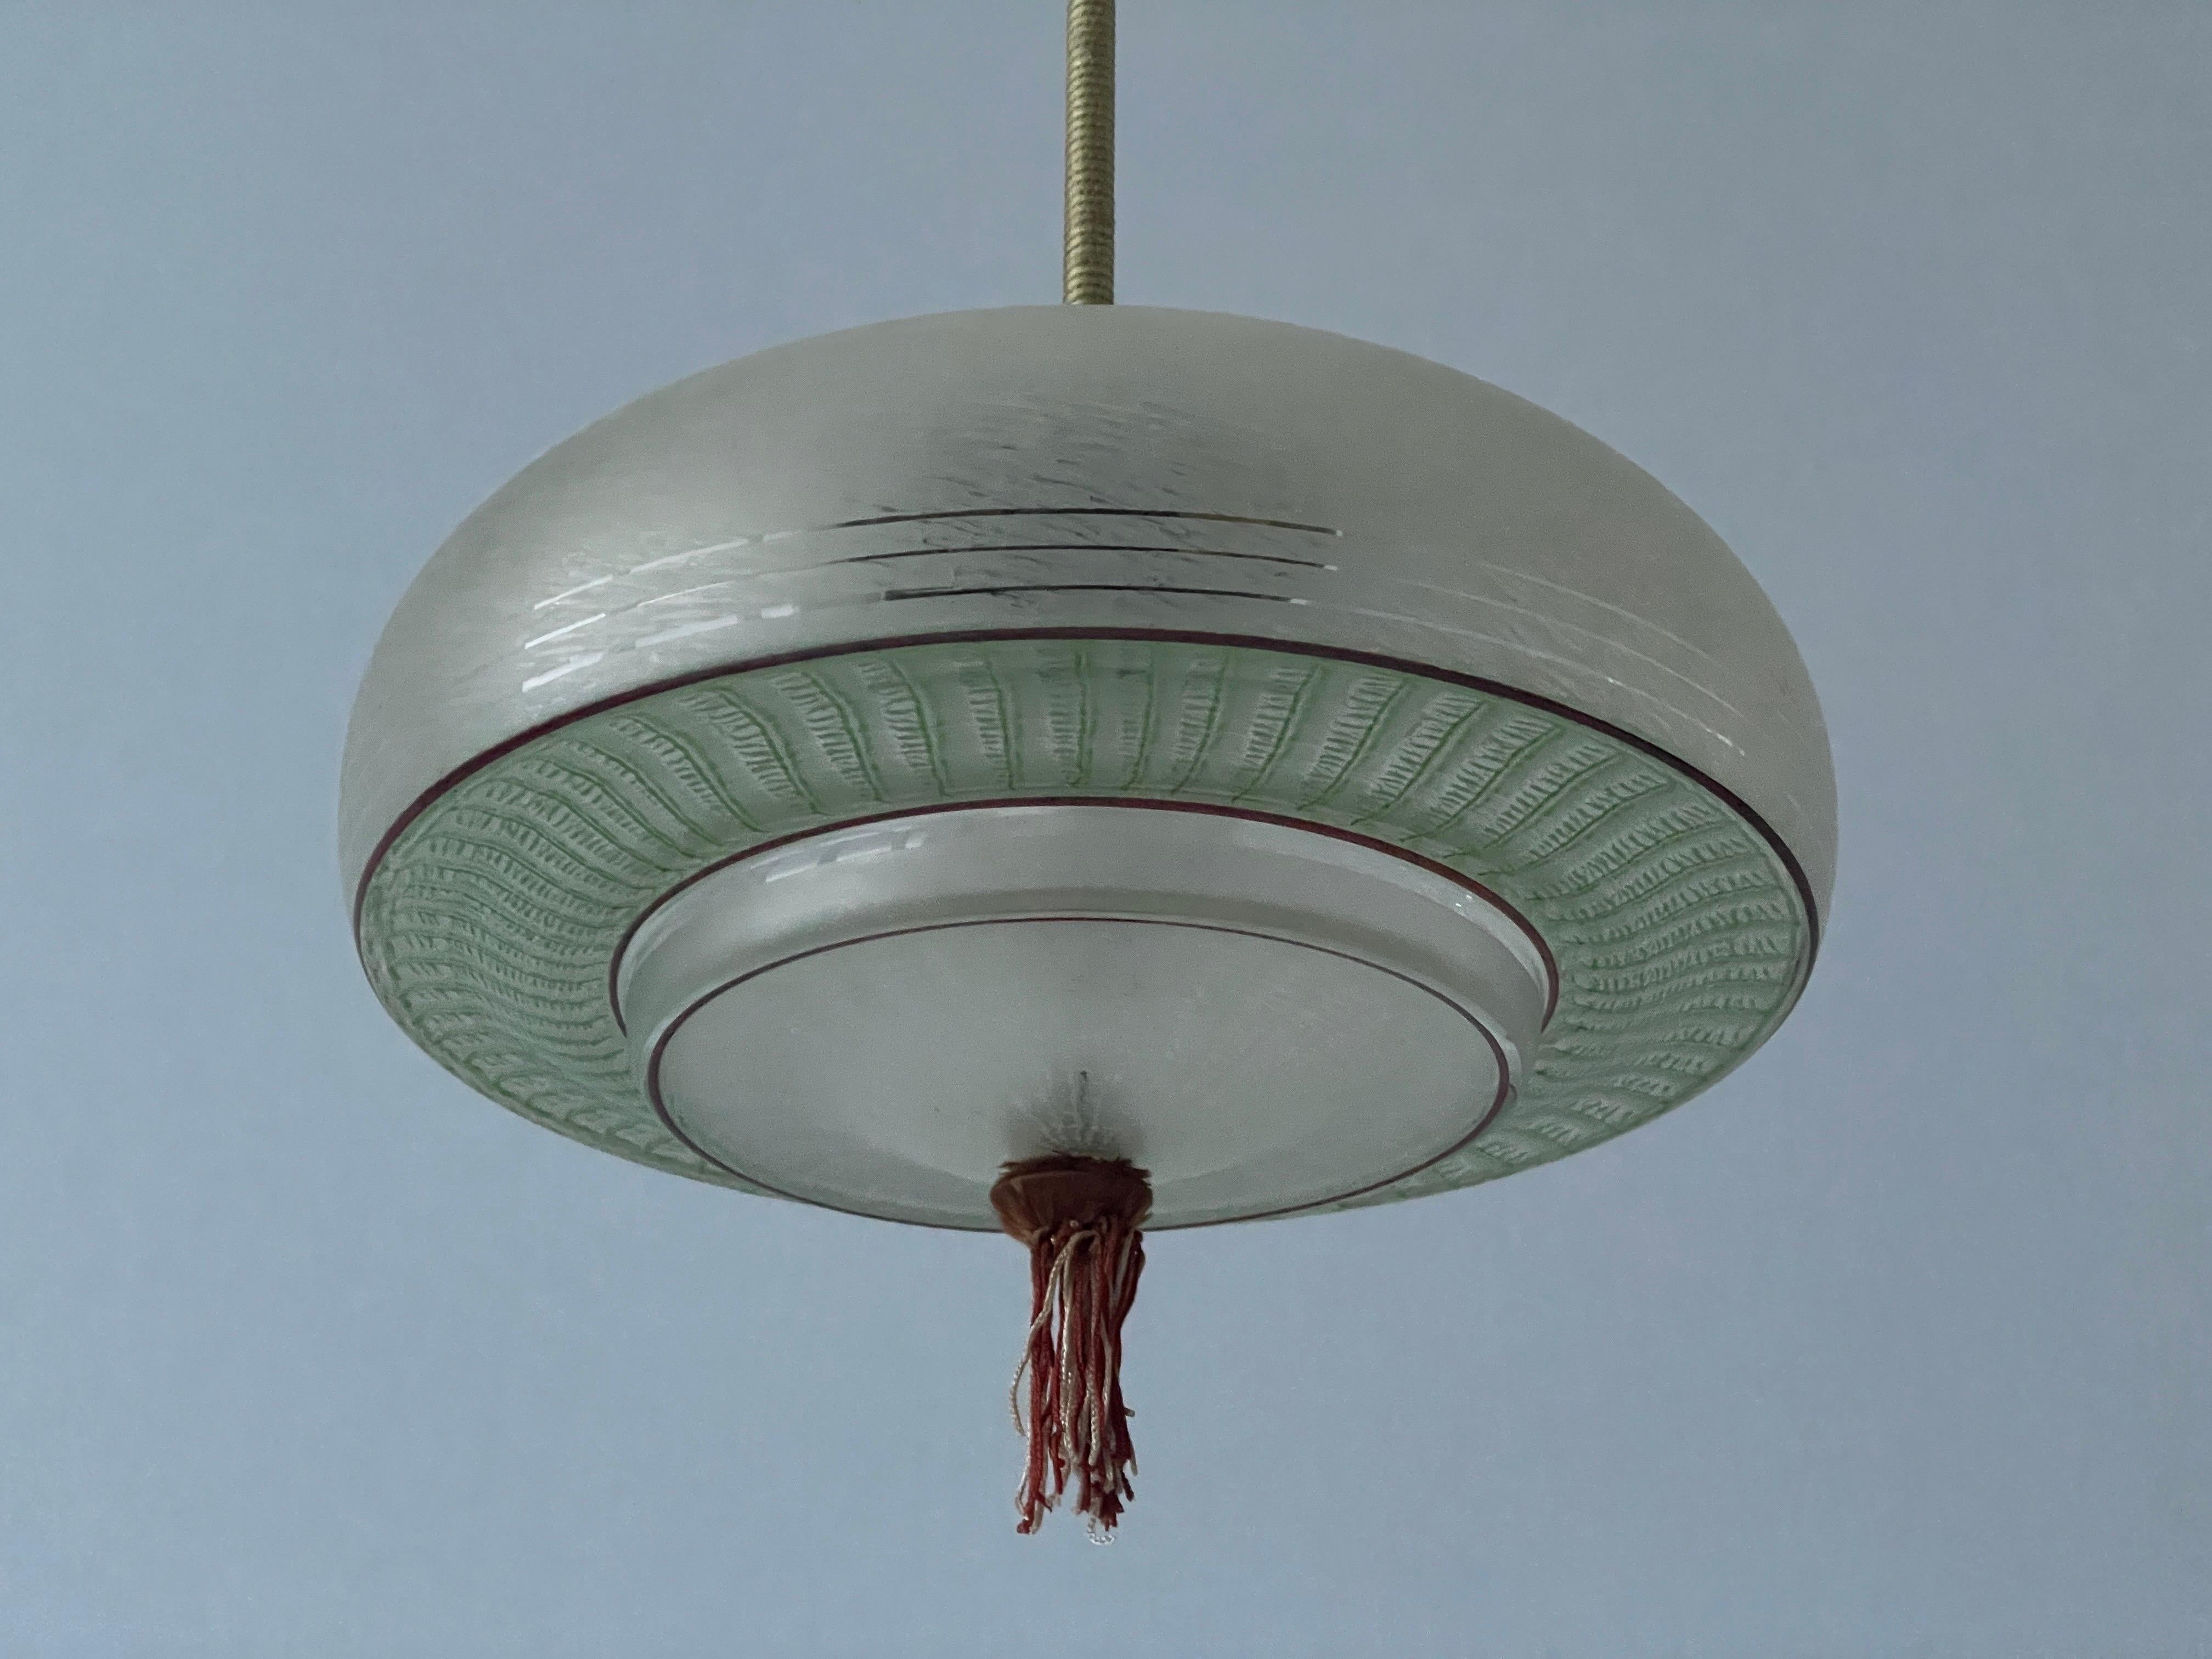 Green Glass Art Deco Style Ceiling Lamp, 1960s, Germany

This lamp works with E27 light bulb.

Measurements: 
Height: 50 cm
Shade diameter and height: 30 cm and 16 cm
